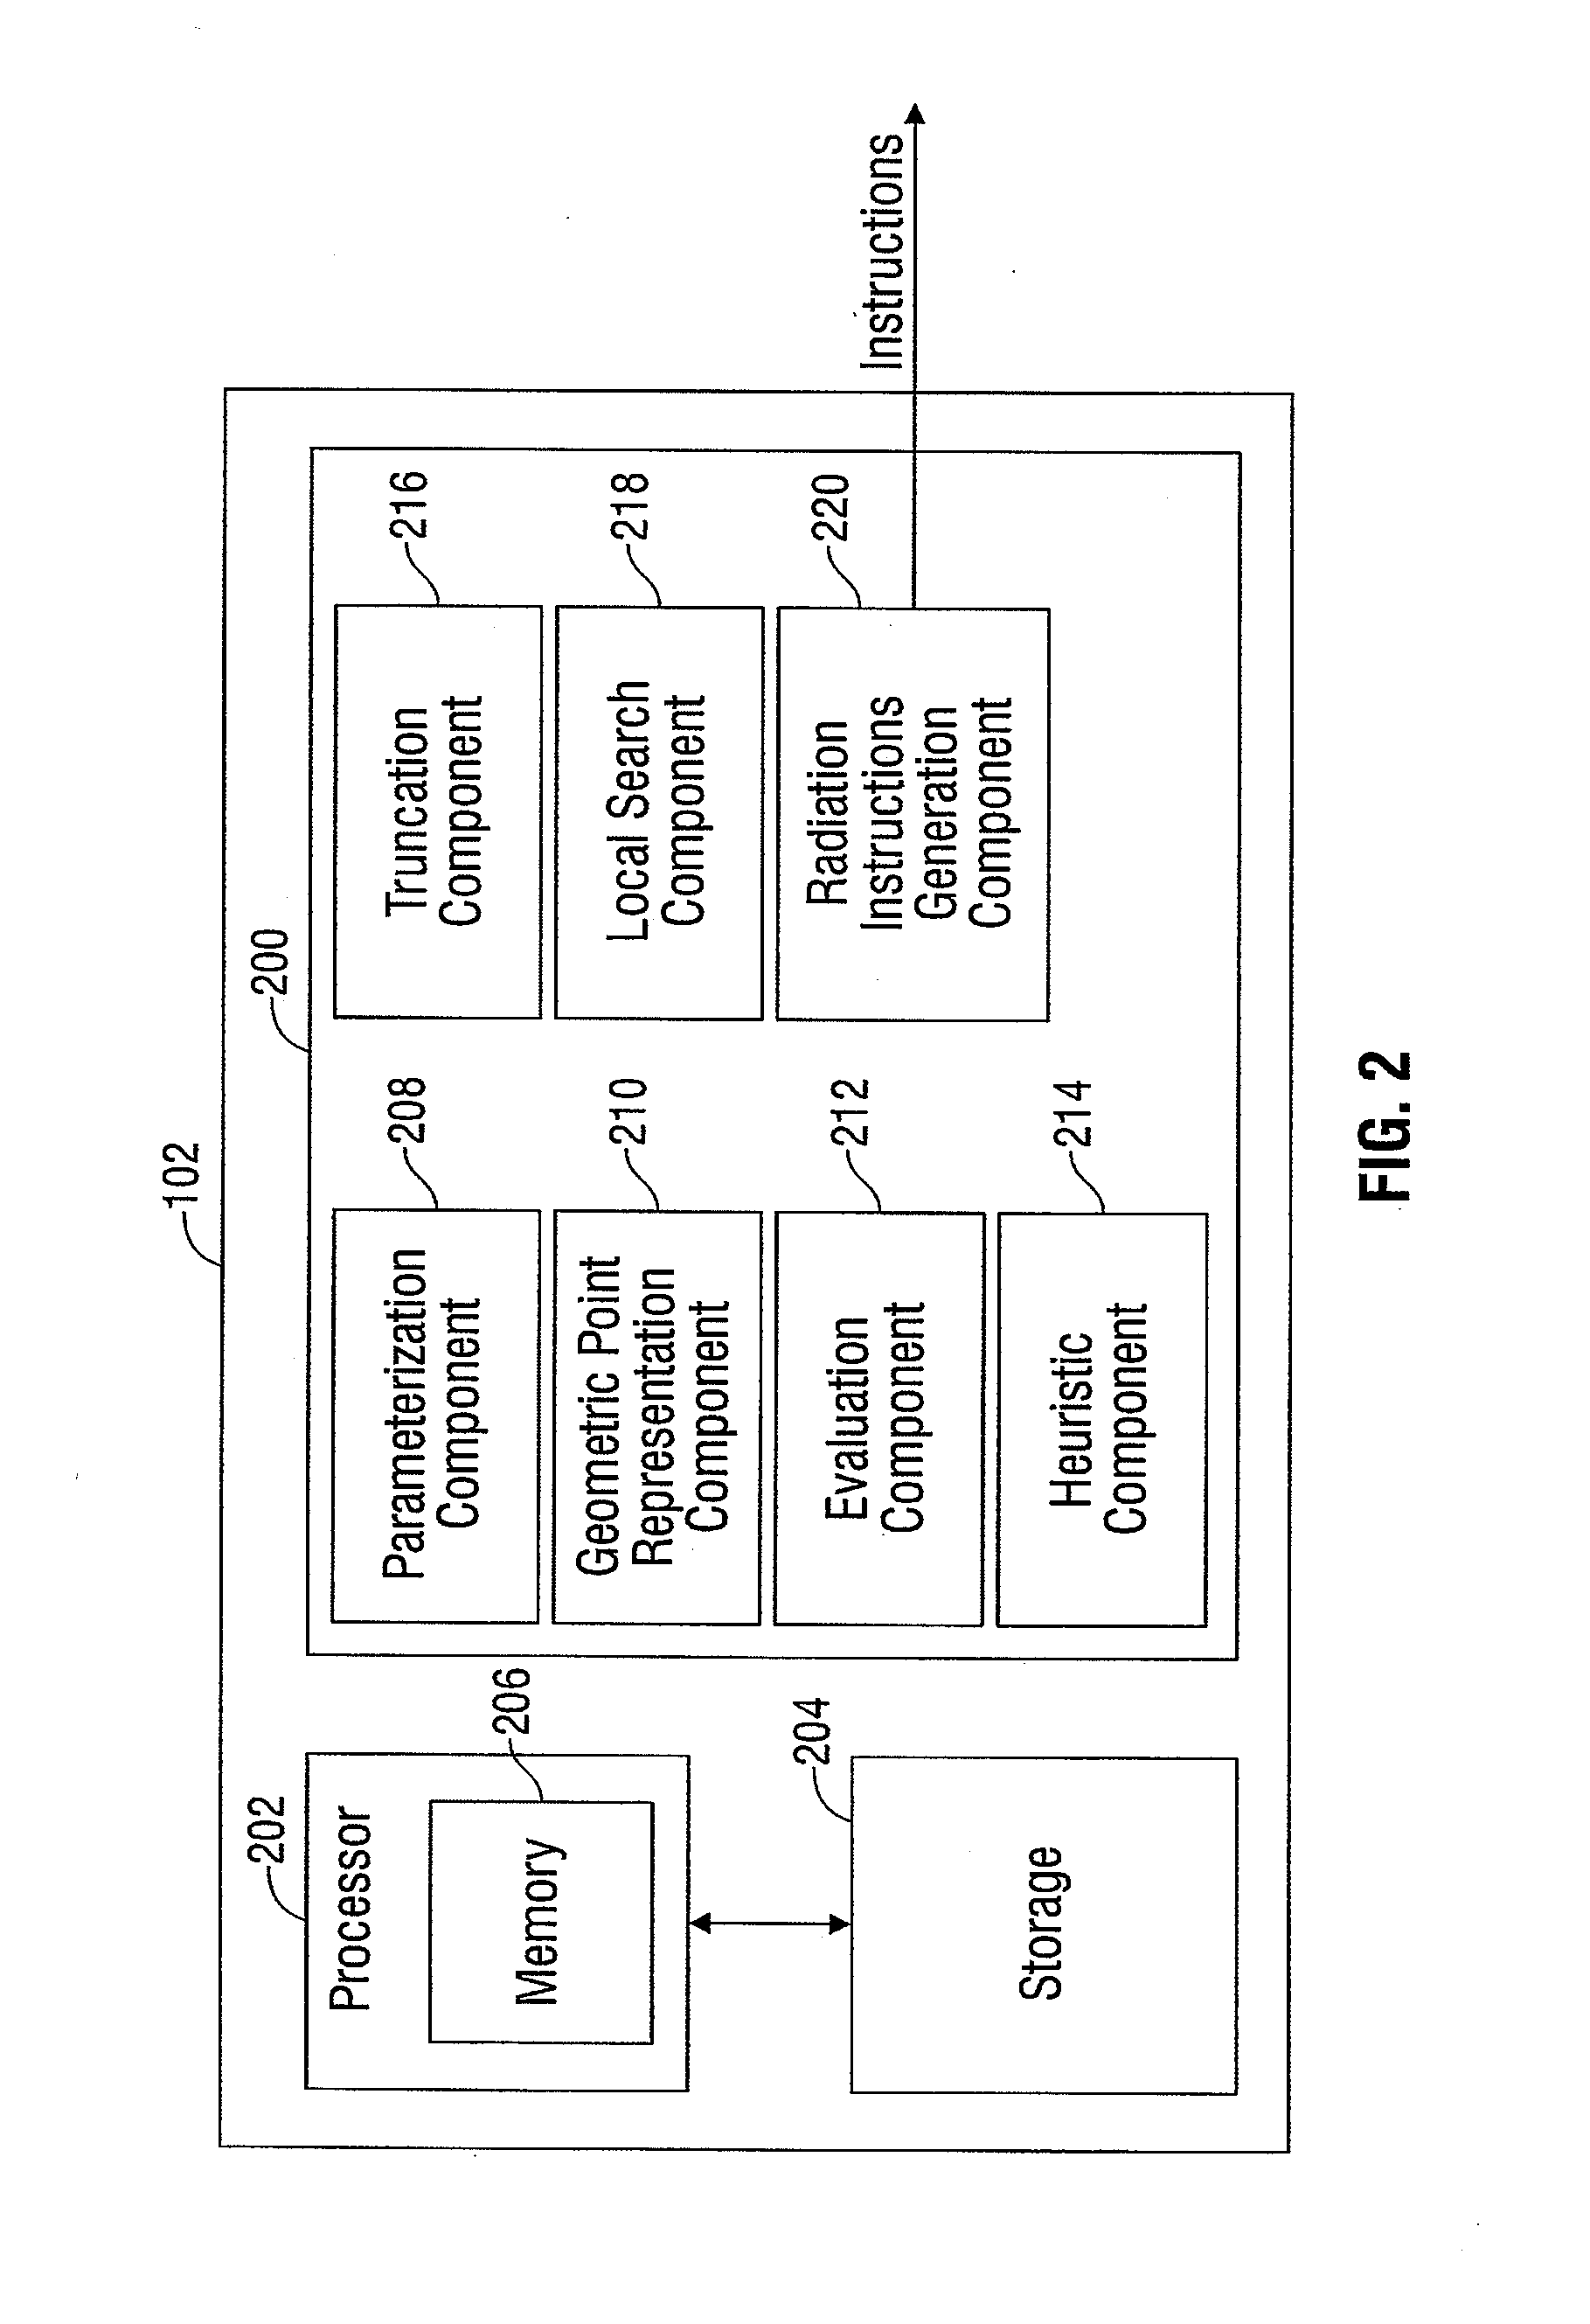 System and method for radiation therapy treatment planning using a memetic optimization algorithm